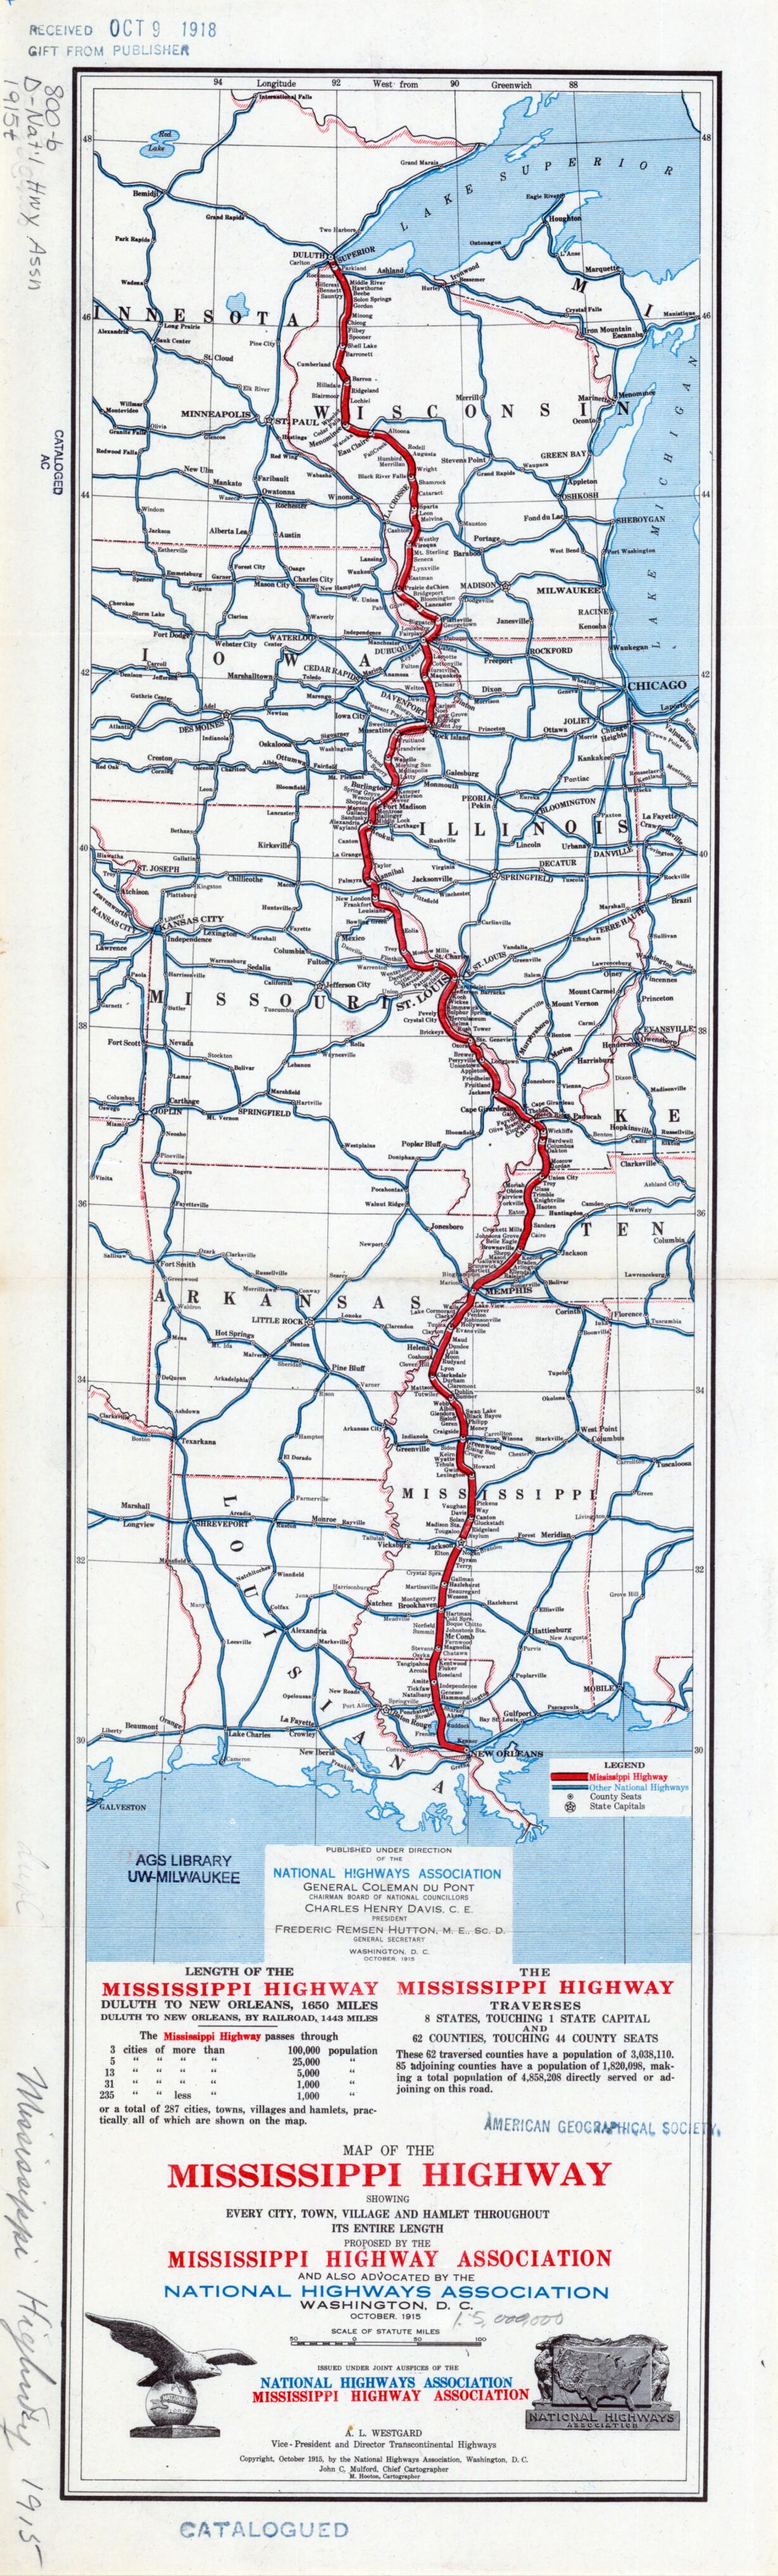 This old map of Map of the Mississippi Highway. (Map of the Mississippi Highway: Showing Every City, Town, Village and Hamlet Throughout Its Entire Length) from 1915 was created by M. Hooton,  Mississippi Highway Association, John C. Mulford,  National H